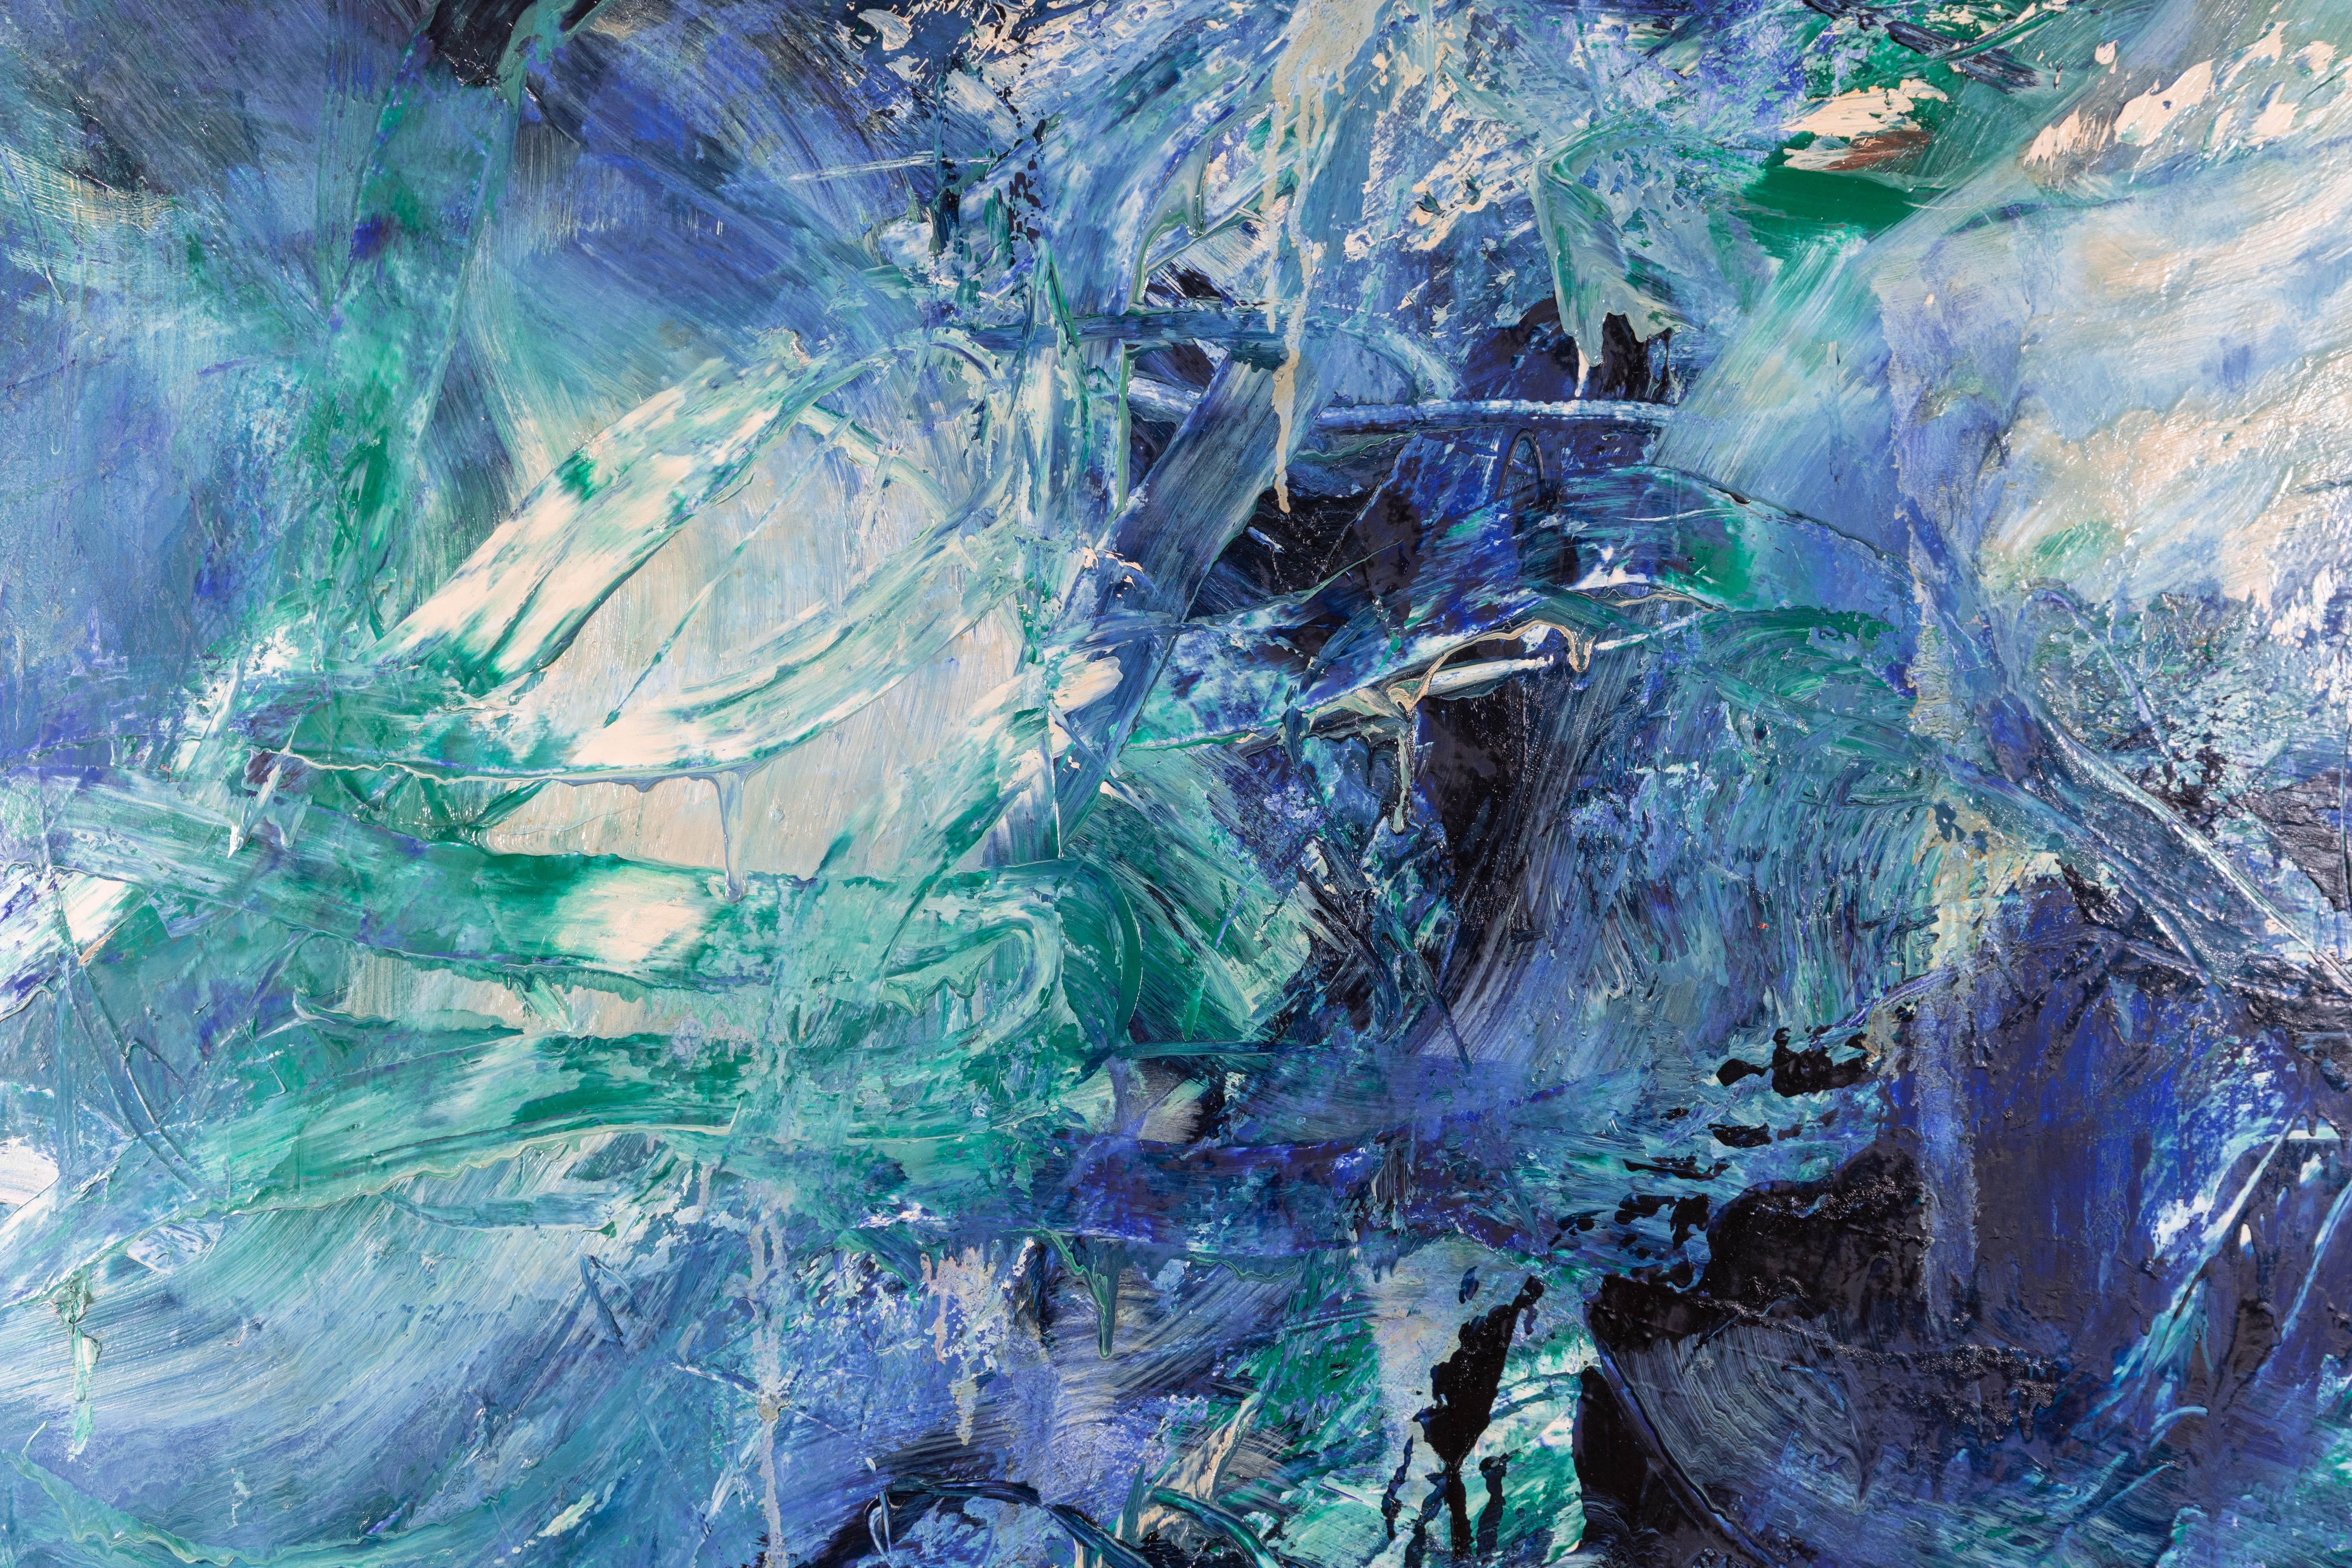 Large scale abstract painting, oil on canvas, by French painter, Dominique Dehais, 1987. Vivid blues, greens, punctuated by blacks and creams comprise the color scheme. Listed artist. Canvas has been newly mounted on new stretcher.